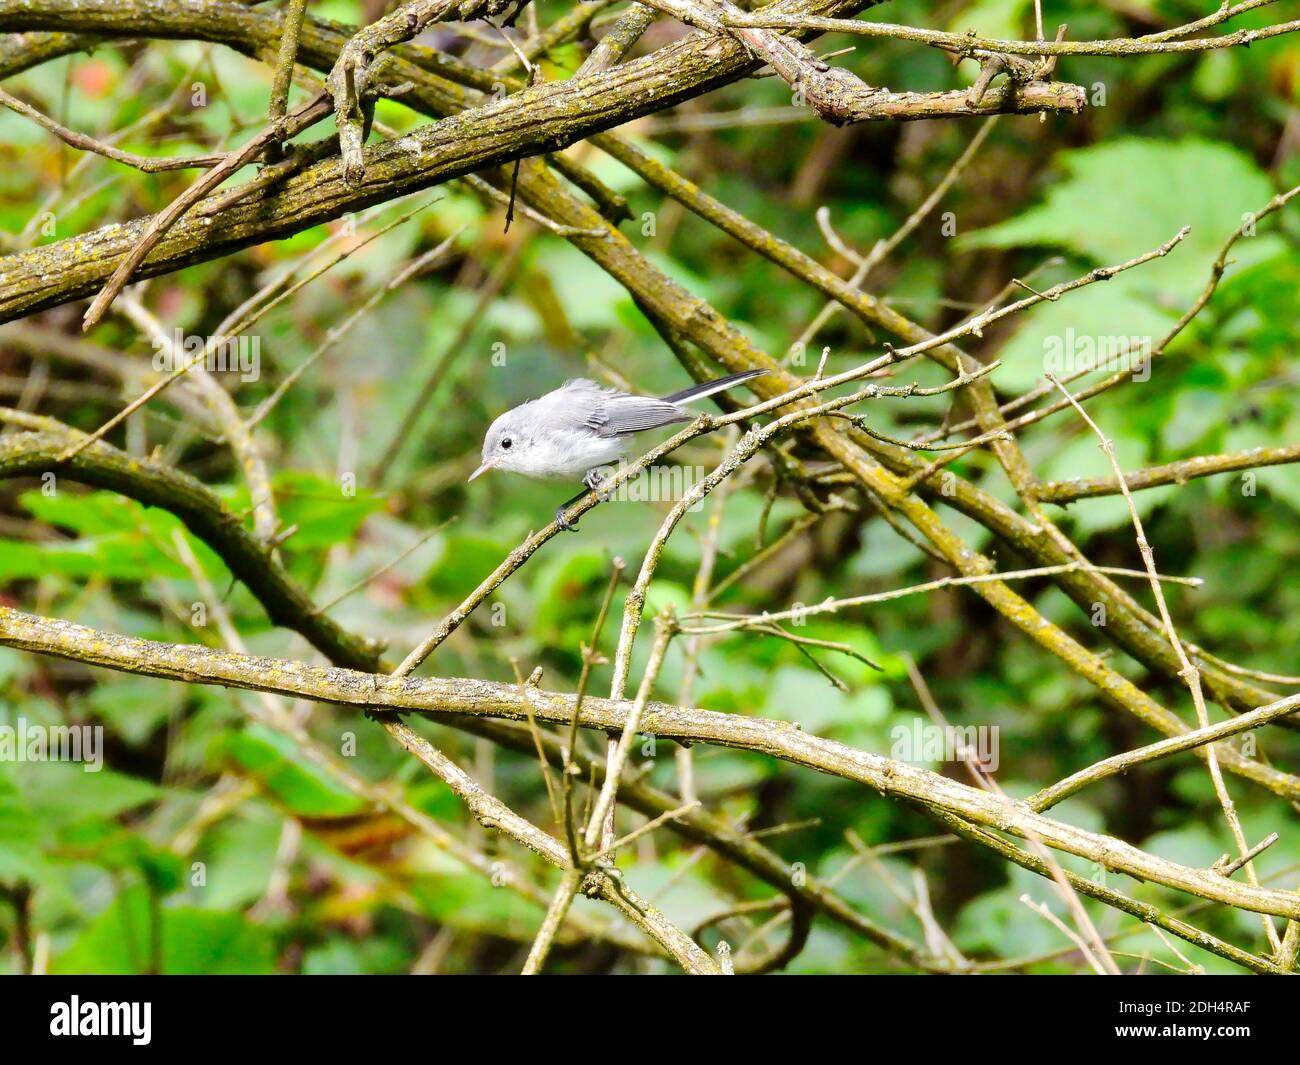 Female Blue-gray Gnatcatcher Bird Among Bush Stems and Branches in Search of Insects with Green Foliage in Background Stock Photo